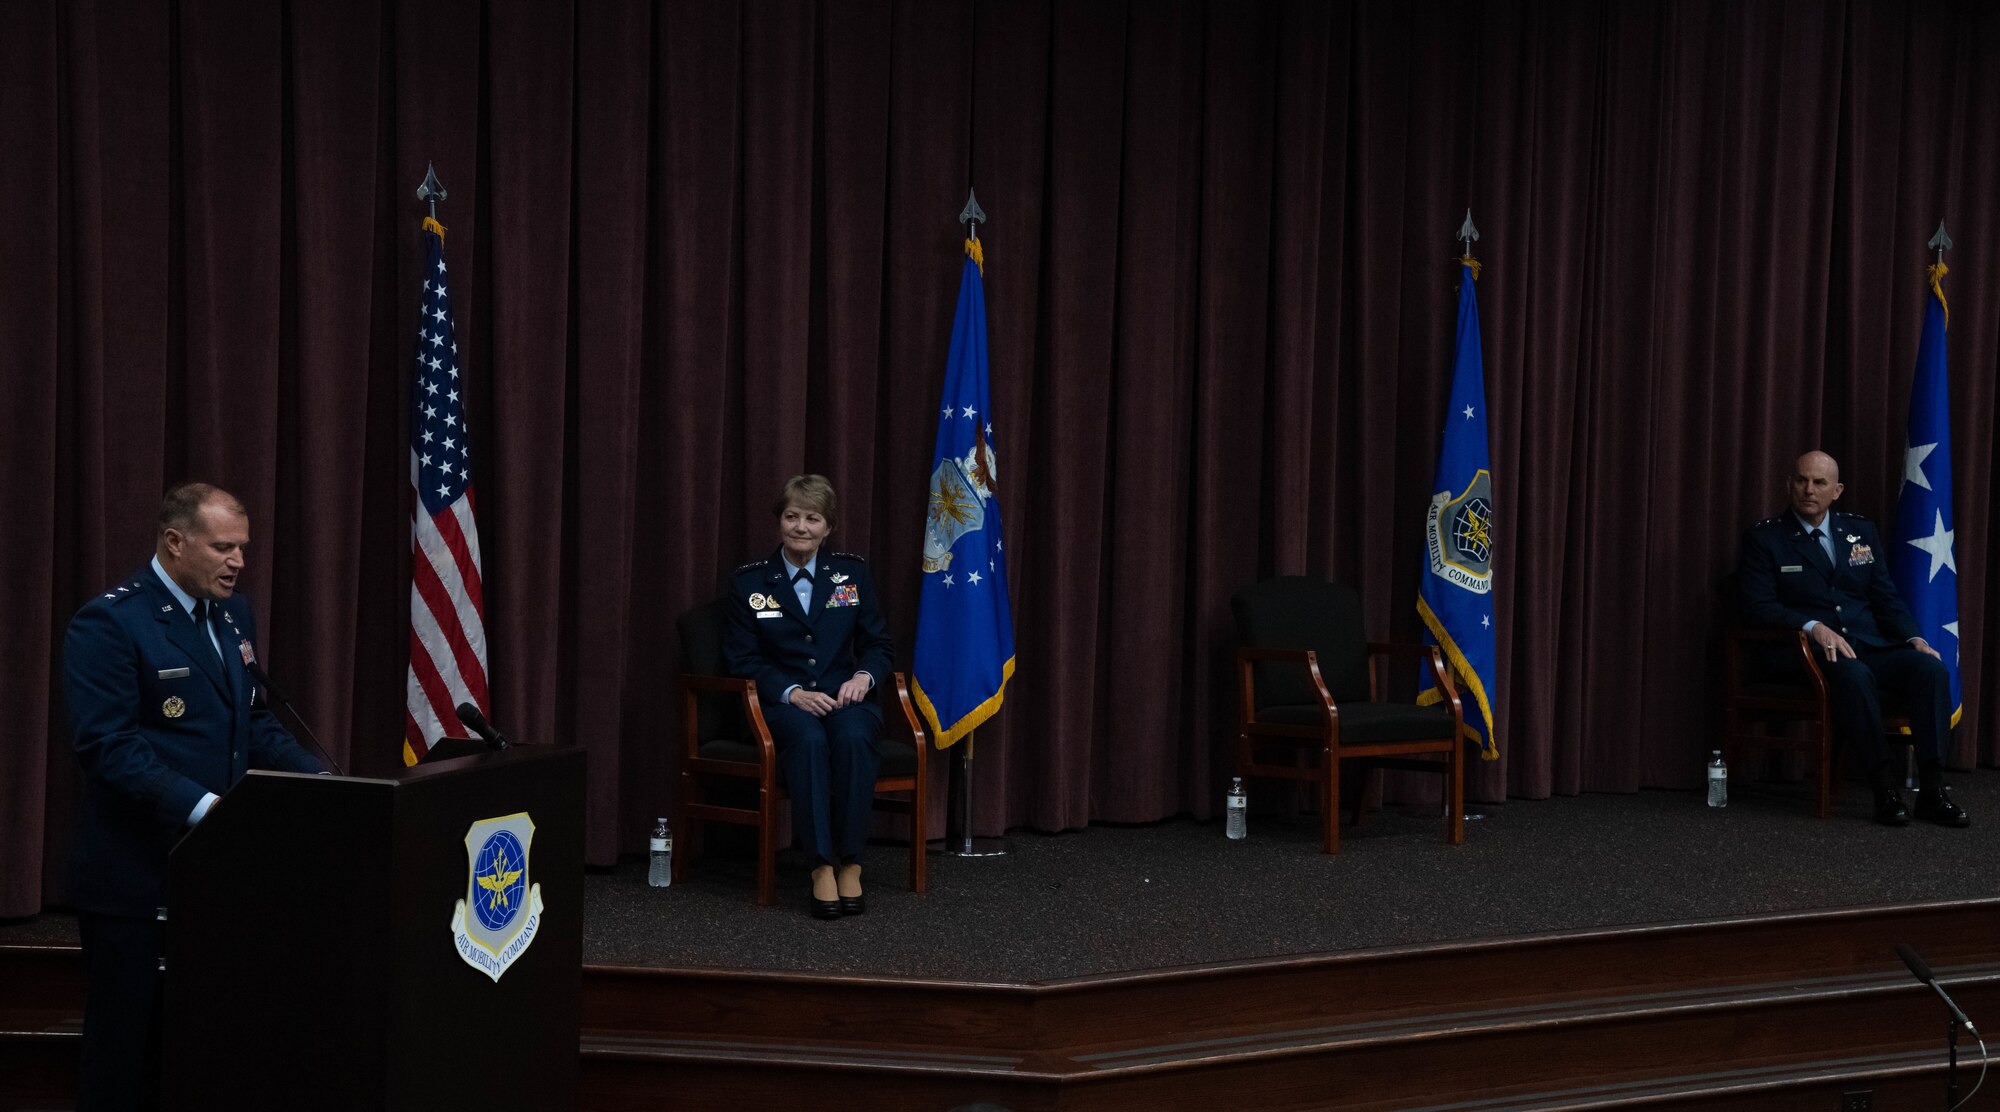 Maj. Gen. Bibb delivers remarks at podium while Gen. Maryanne Miller and Maj. Gen. Barrett view from the stage.